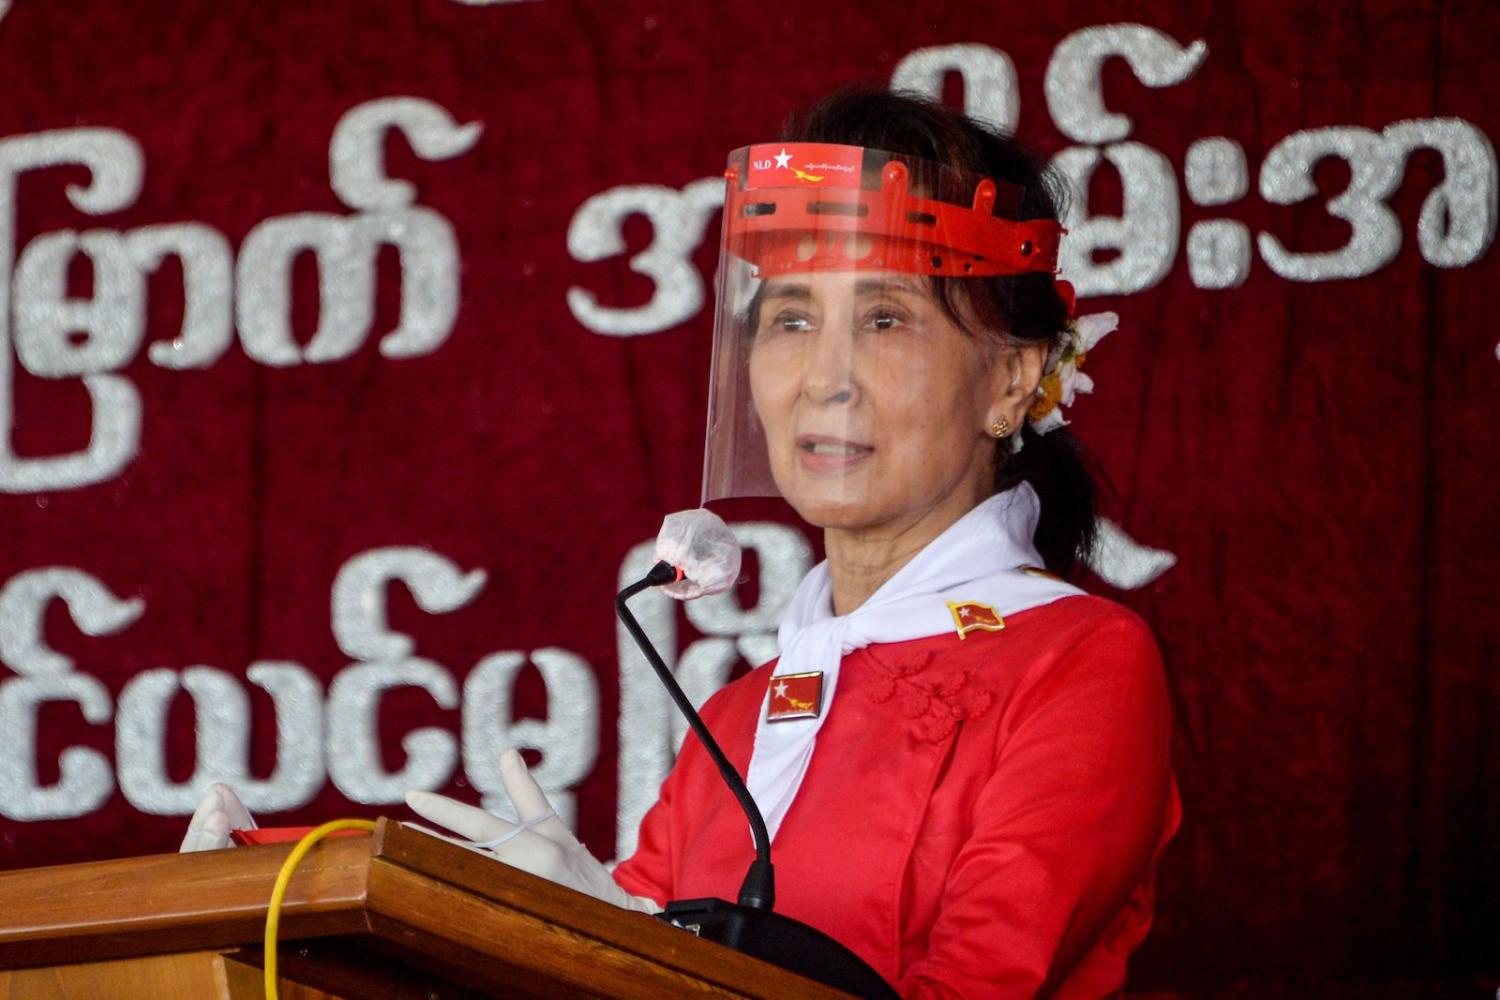 Myanmar's political leader Aung San Suu Kyi at a ceremony in Naypyidaw, 27 September 2020 (Thet Aung/AFP via Getty Images)